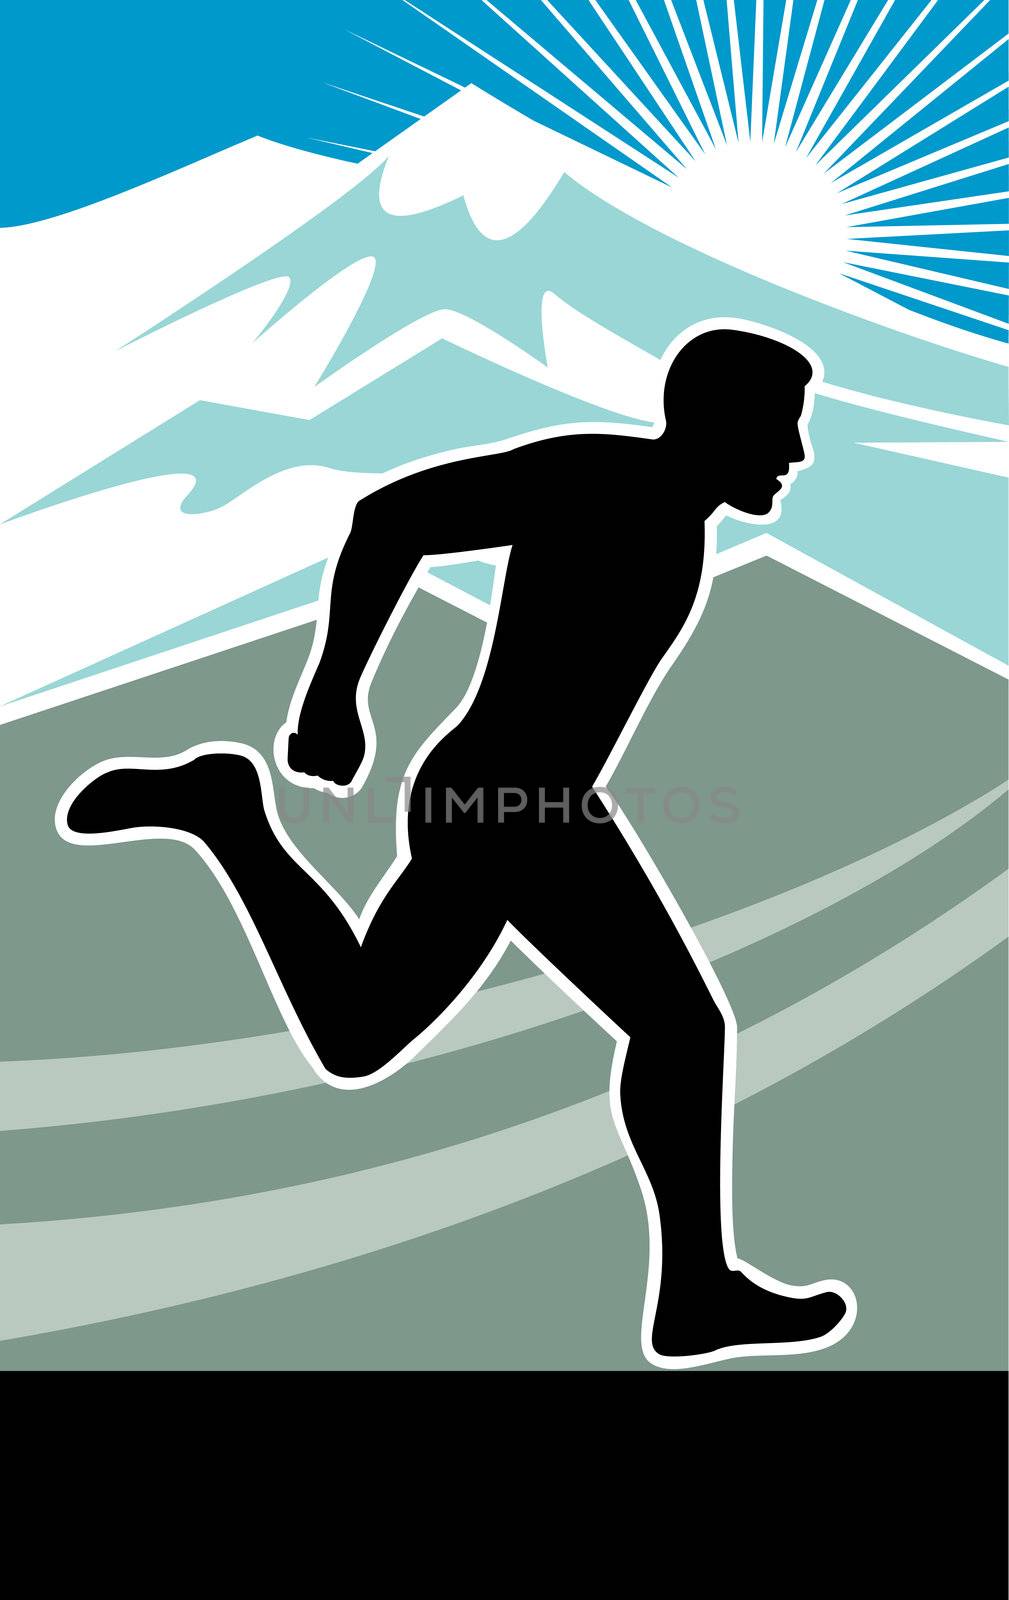 illustration of a Marathon runner silhouette side vew with mountains and sunburst in background done in retro style